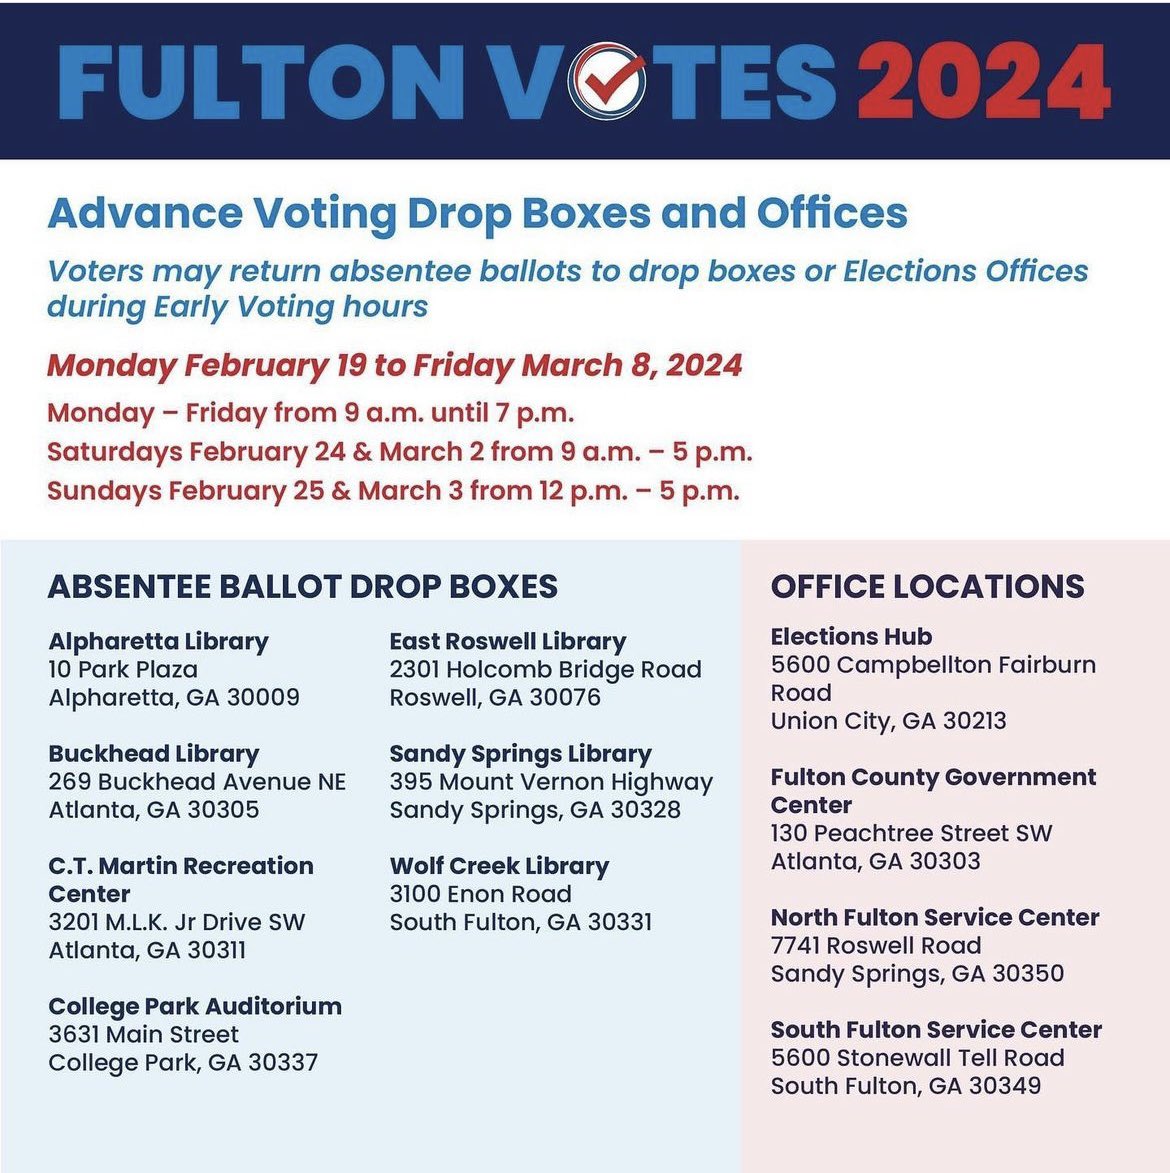 🇺🇸 Advance voting for the March 12 Presidential Preference Primary begins next Monday, February 19. Every vote counts! Skip the lines and vote early. For more info visit fultoncountyga.gov or download the free Fulton Votes mobile app. #EarlyVoting #FultonVotes 🗳️